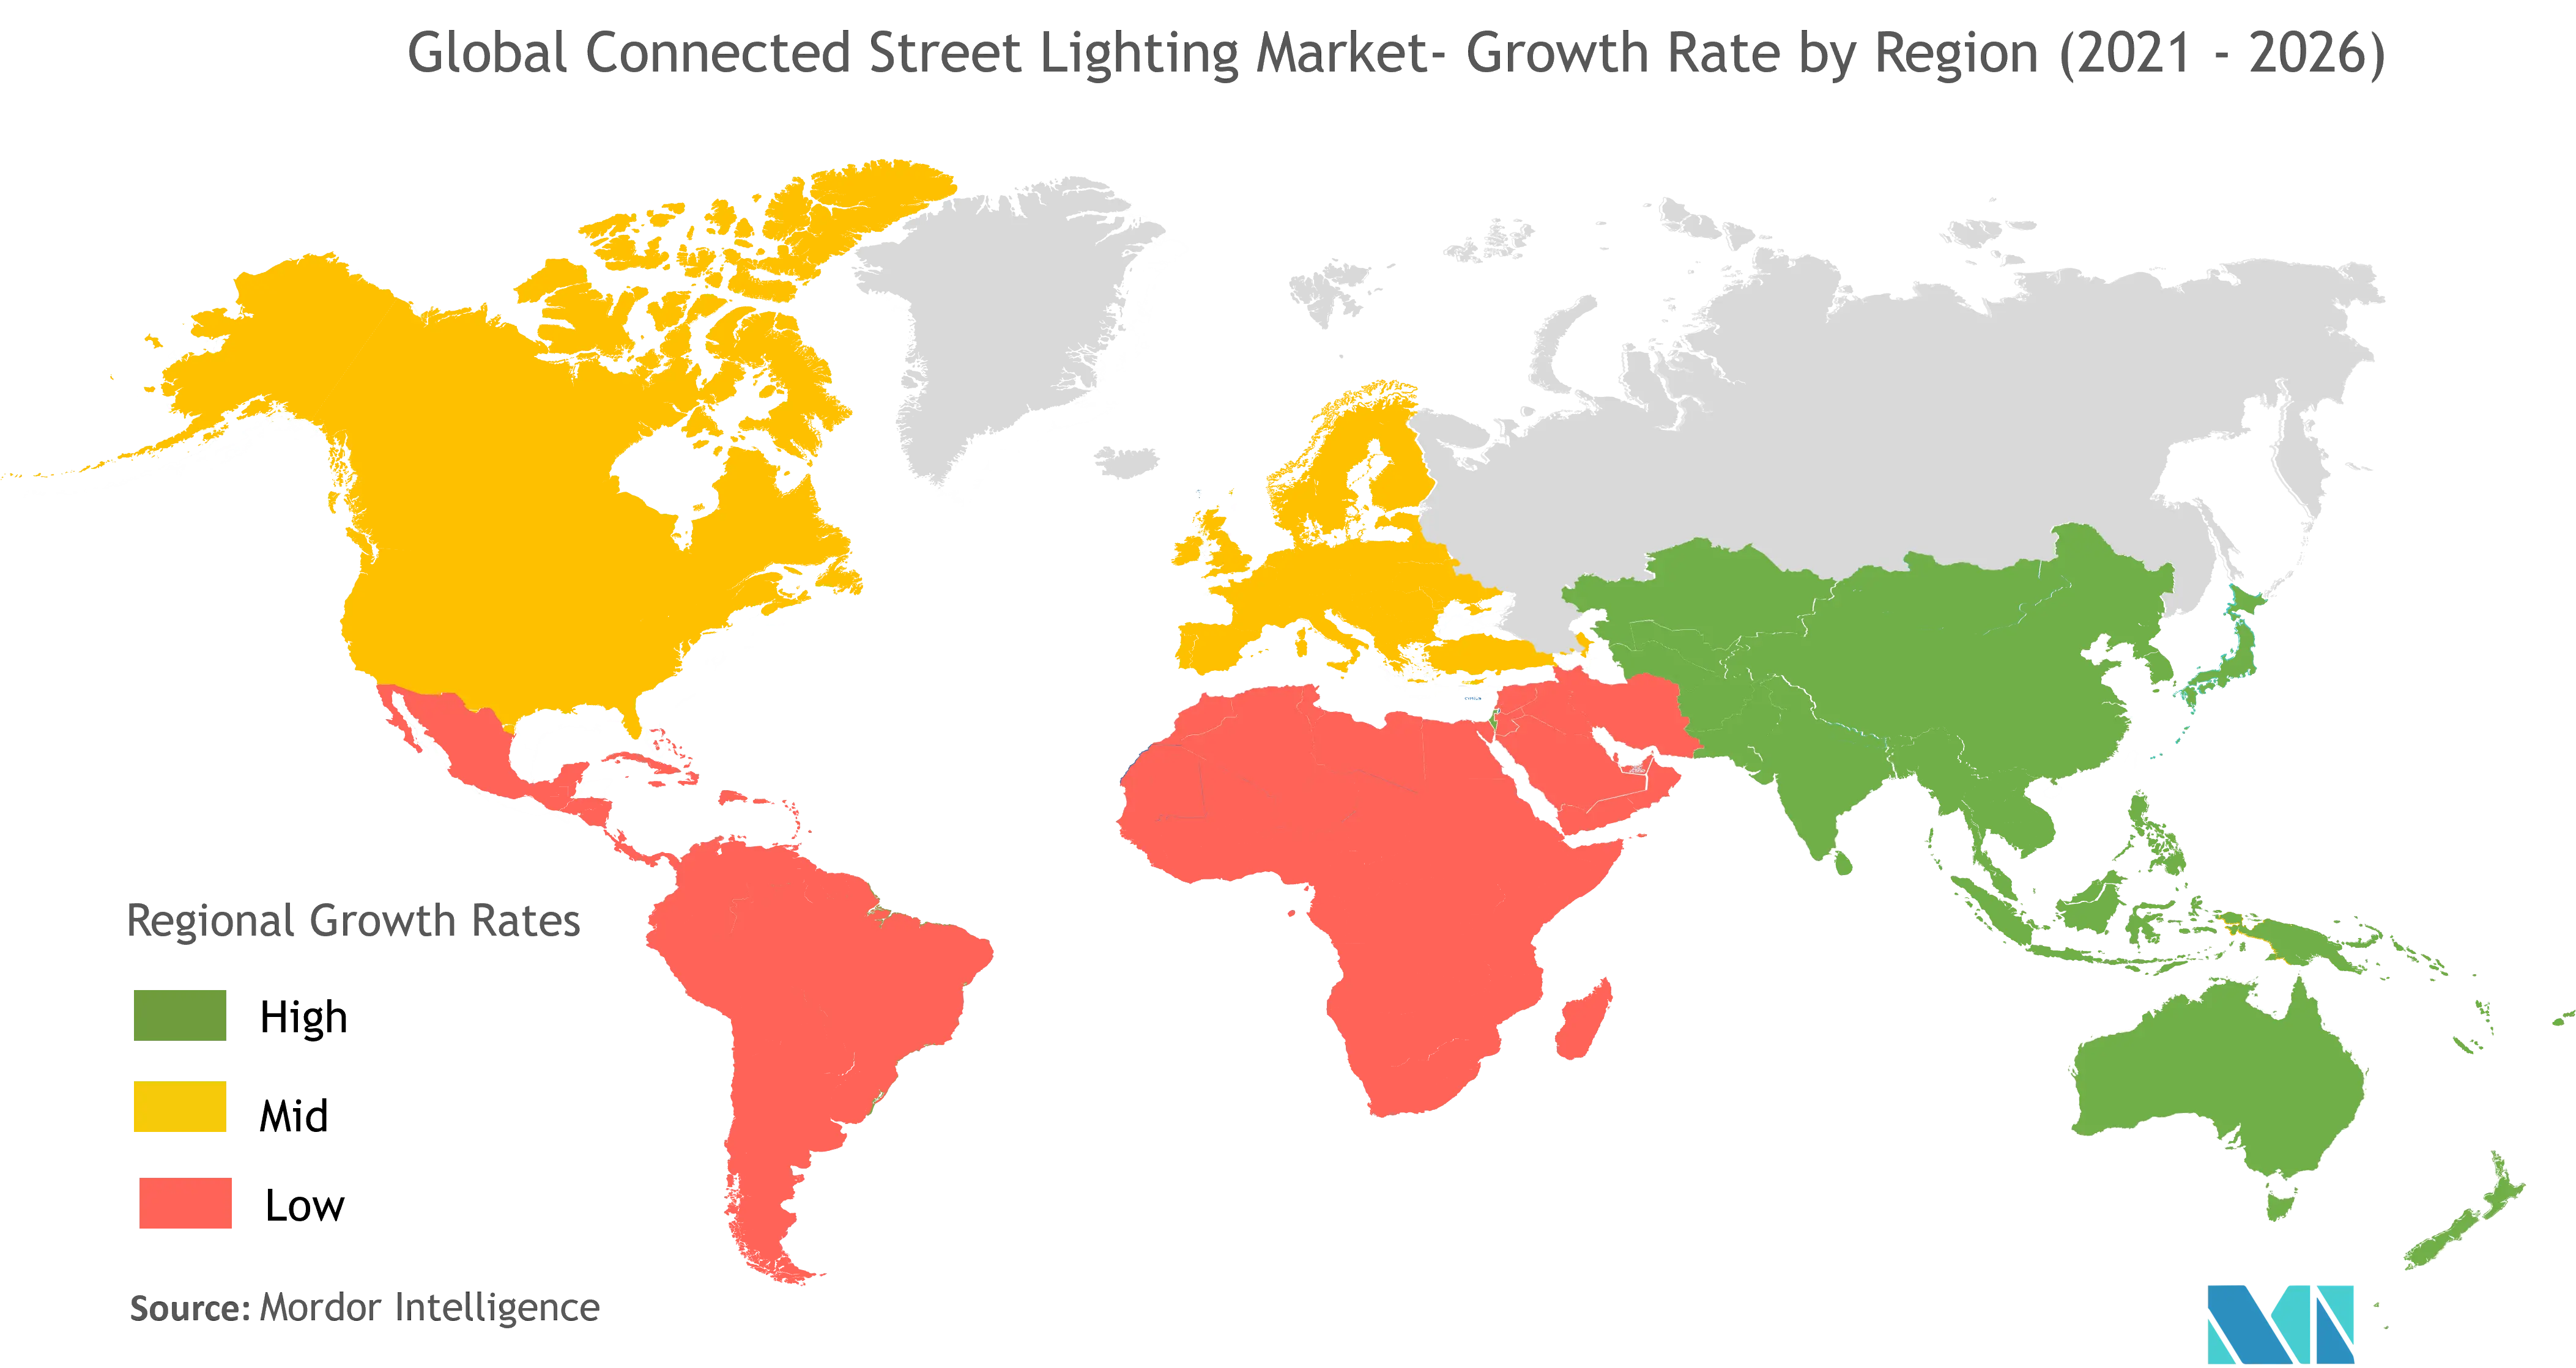 Connected Street Lighting Market Growth